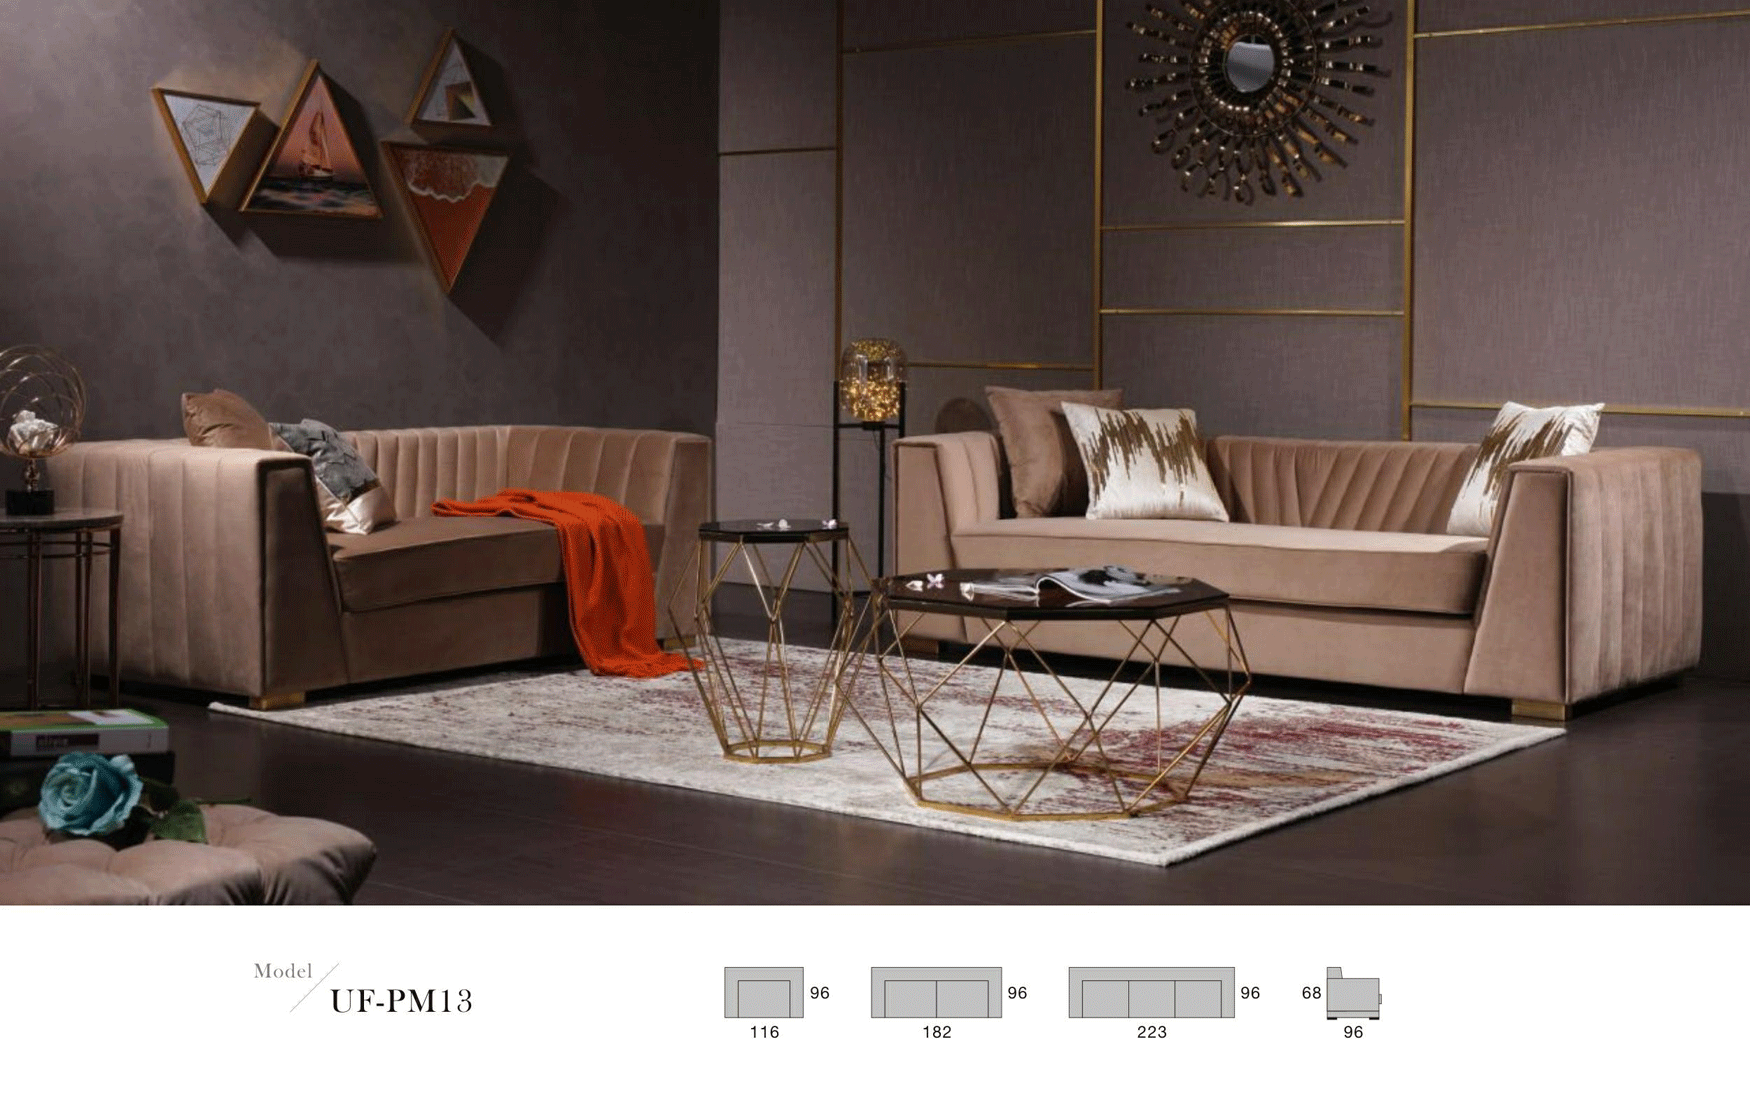 Living Room Furniture Sleepers Sofas Loveseats and Chairs PM13 LIVING ROOM SET FABRIC